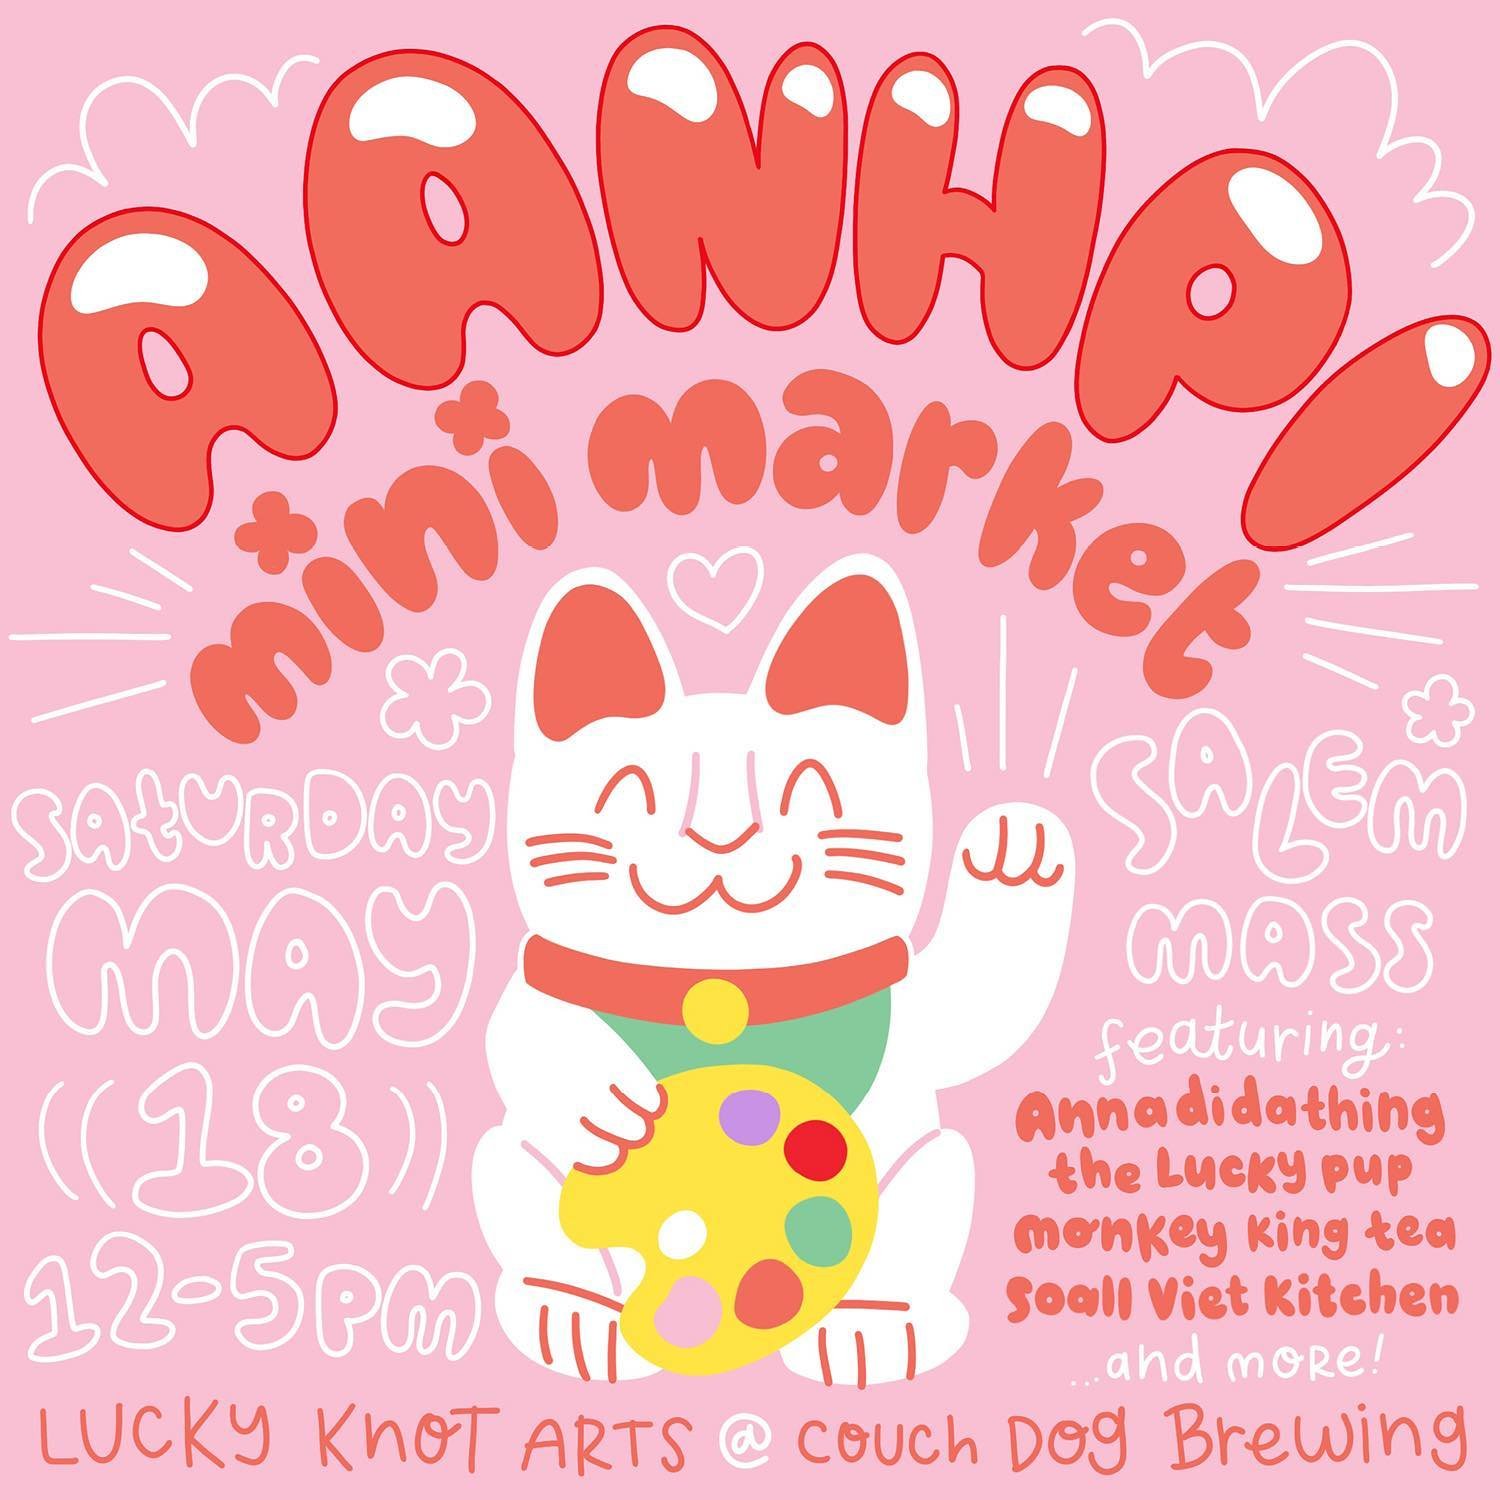 TODAY at @couchdogbrewing! 🥳

Swing by for a beer, tasty @soallvietkitchen and @monkeykingtea bites, art by @annadidathing, and @shoptheluckypup treats for your pets! We&rsquo;ll have coloring pages as a free family-friendly activity, some cute pins